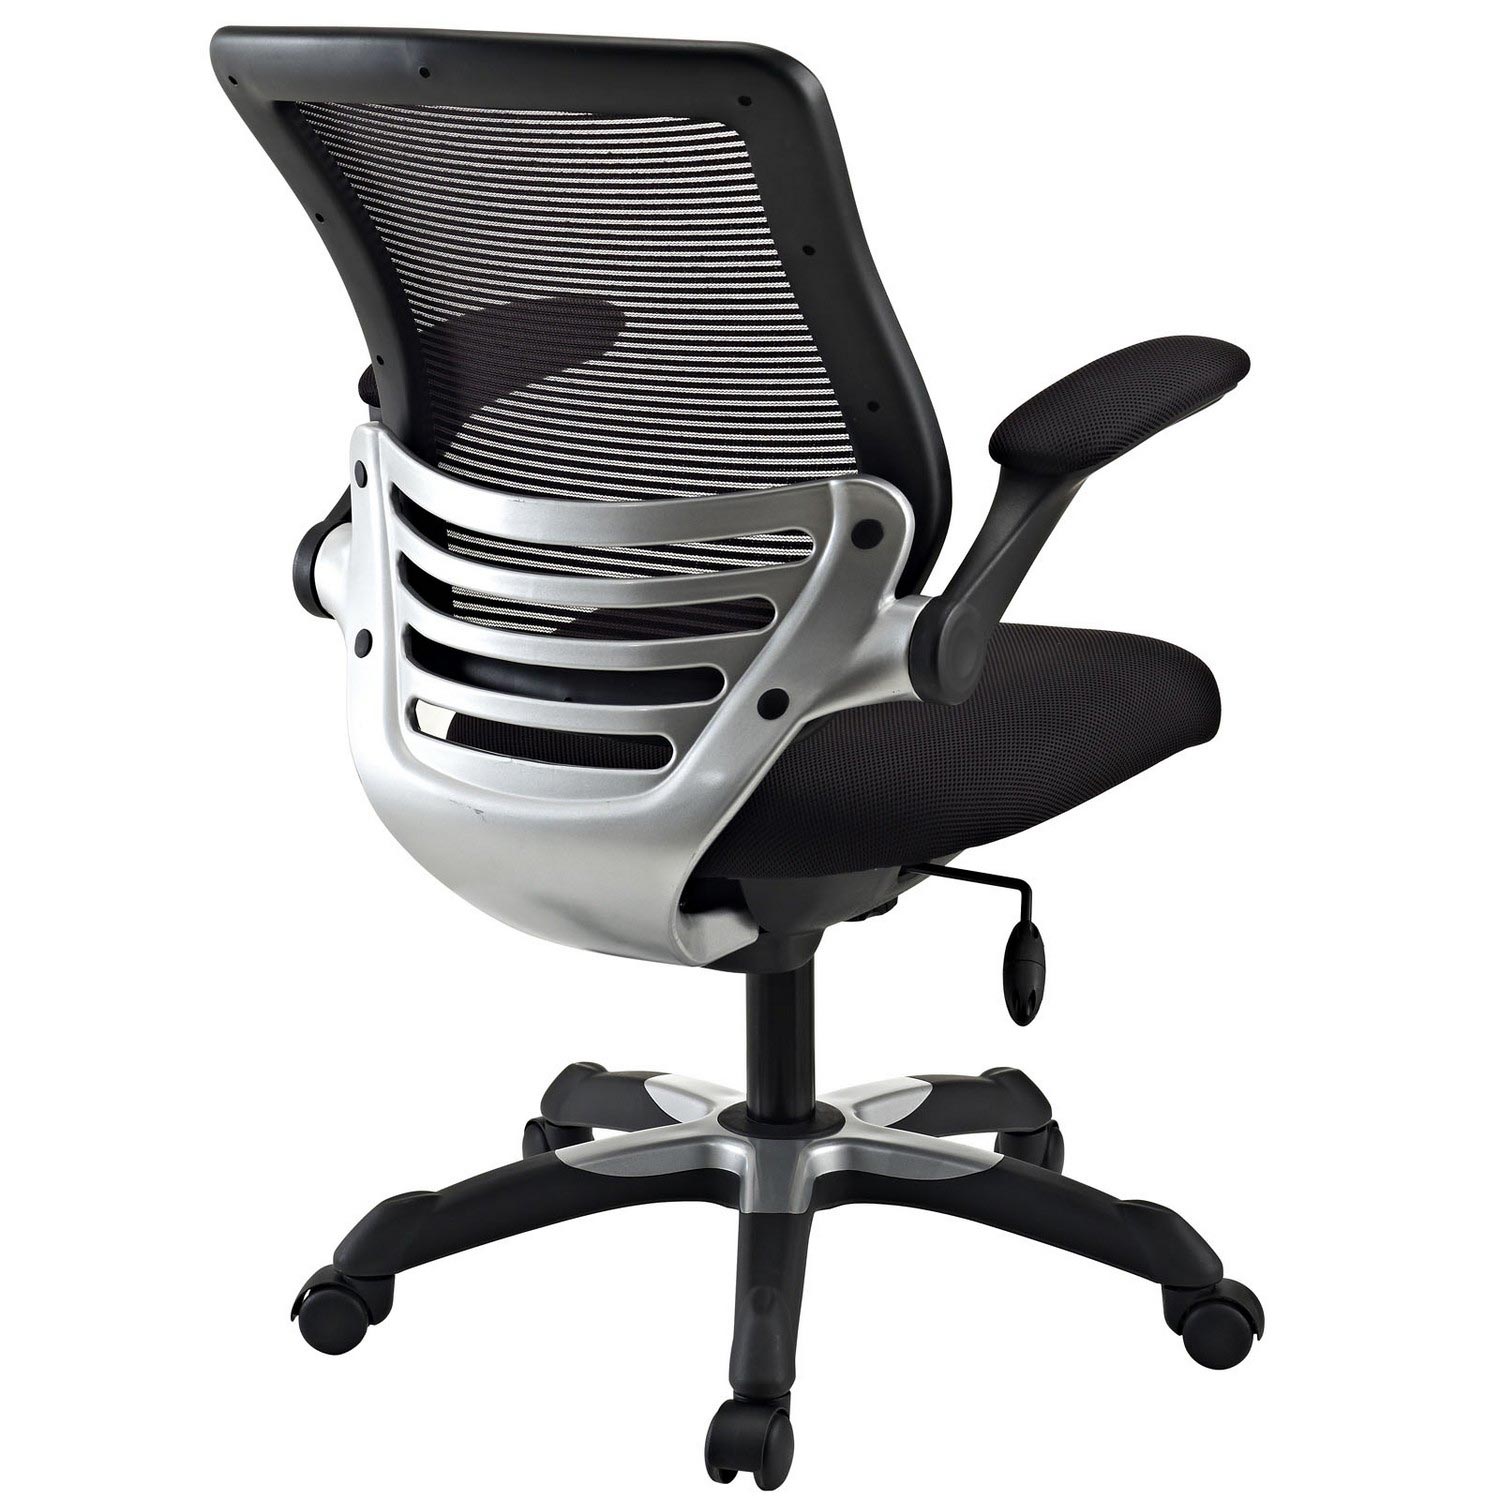 Modway Edge Office Chair - Black